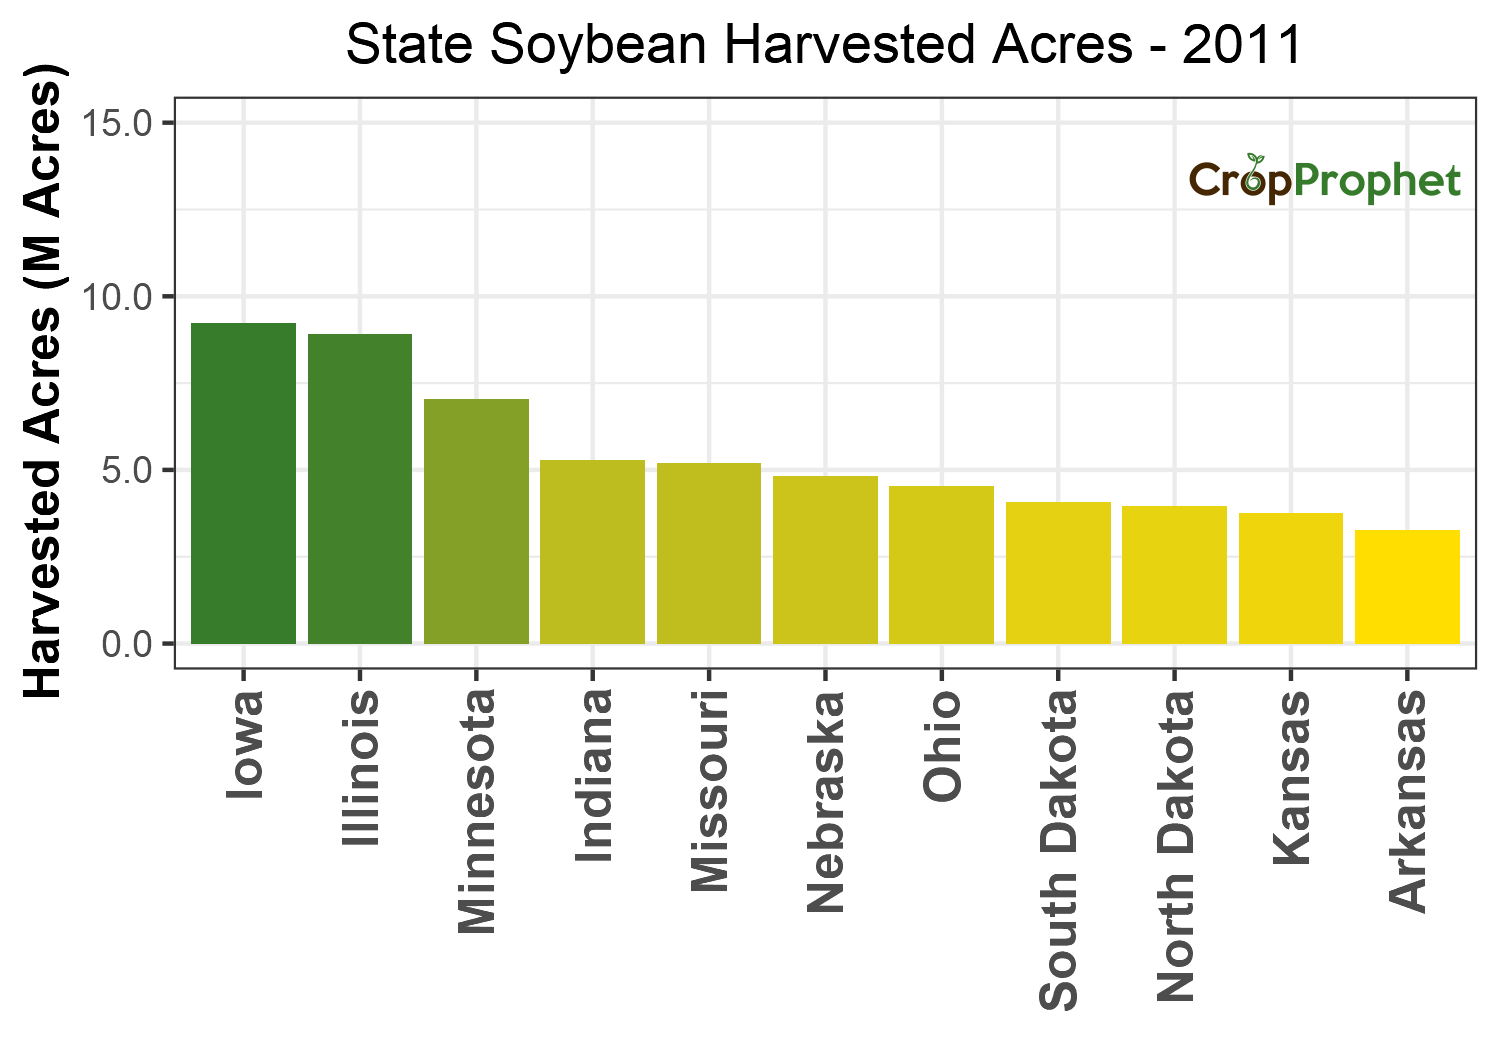 Soybean Harvested Acres by State - 2011 Rankings